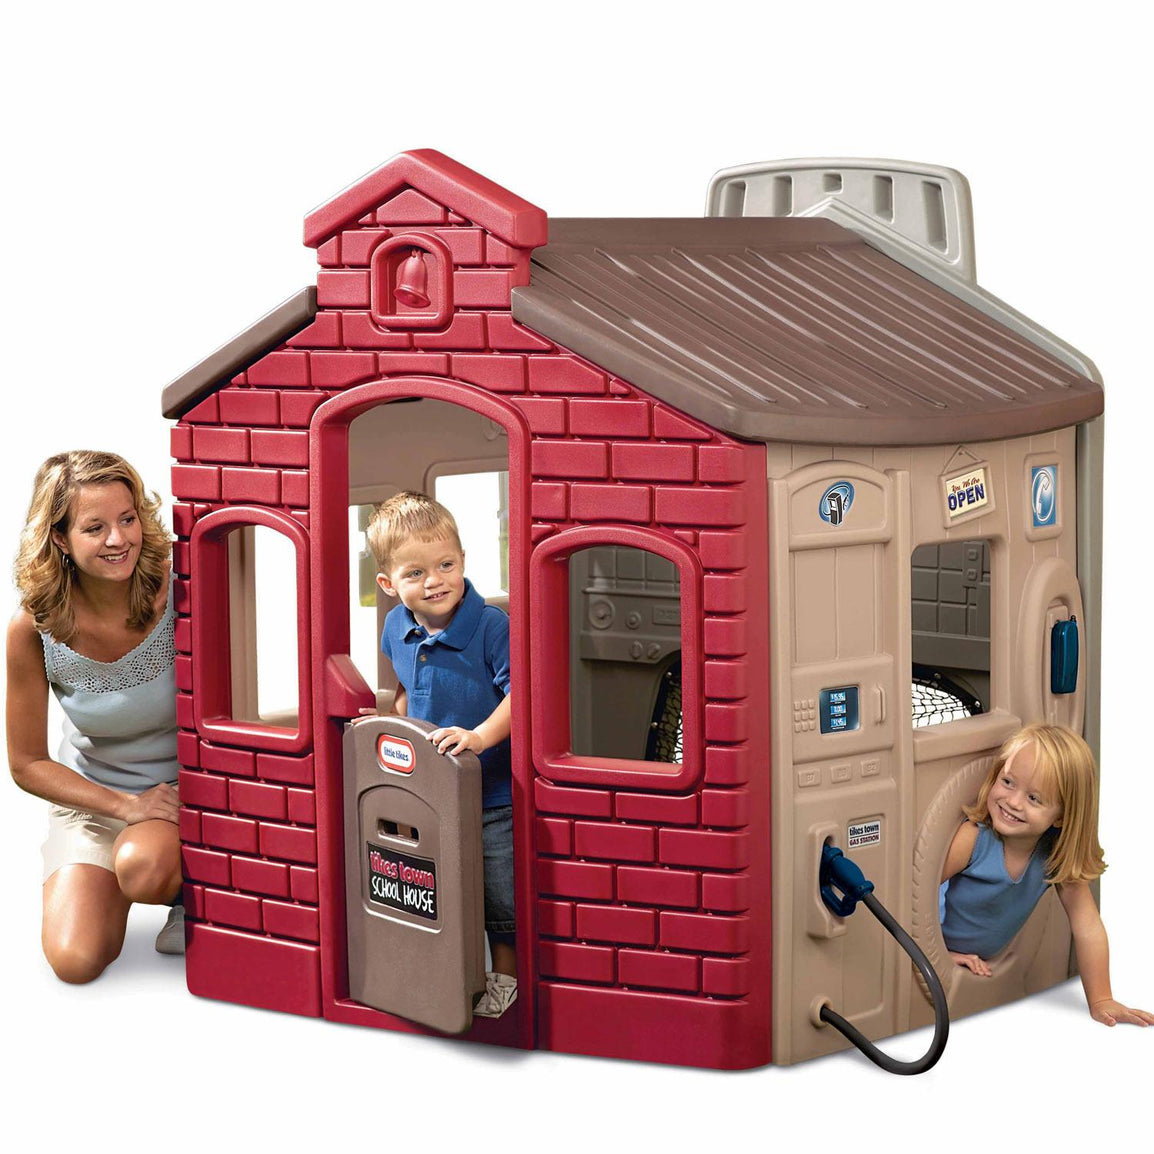 Endless Adventures Tikes Town Playhouse is perfect for the backyard